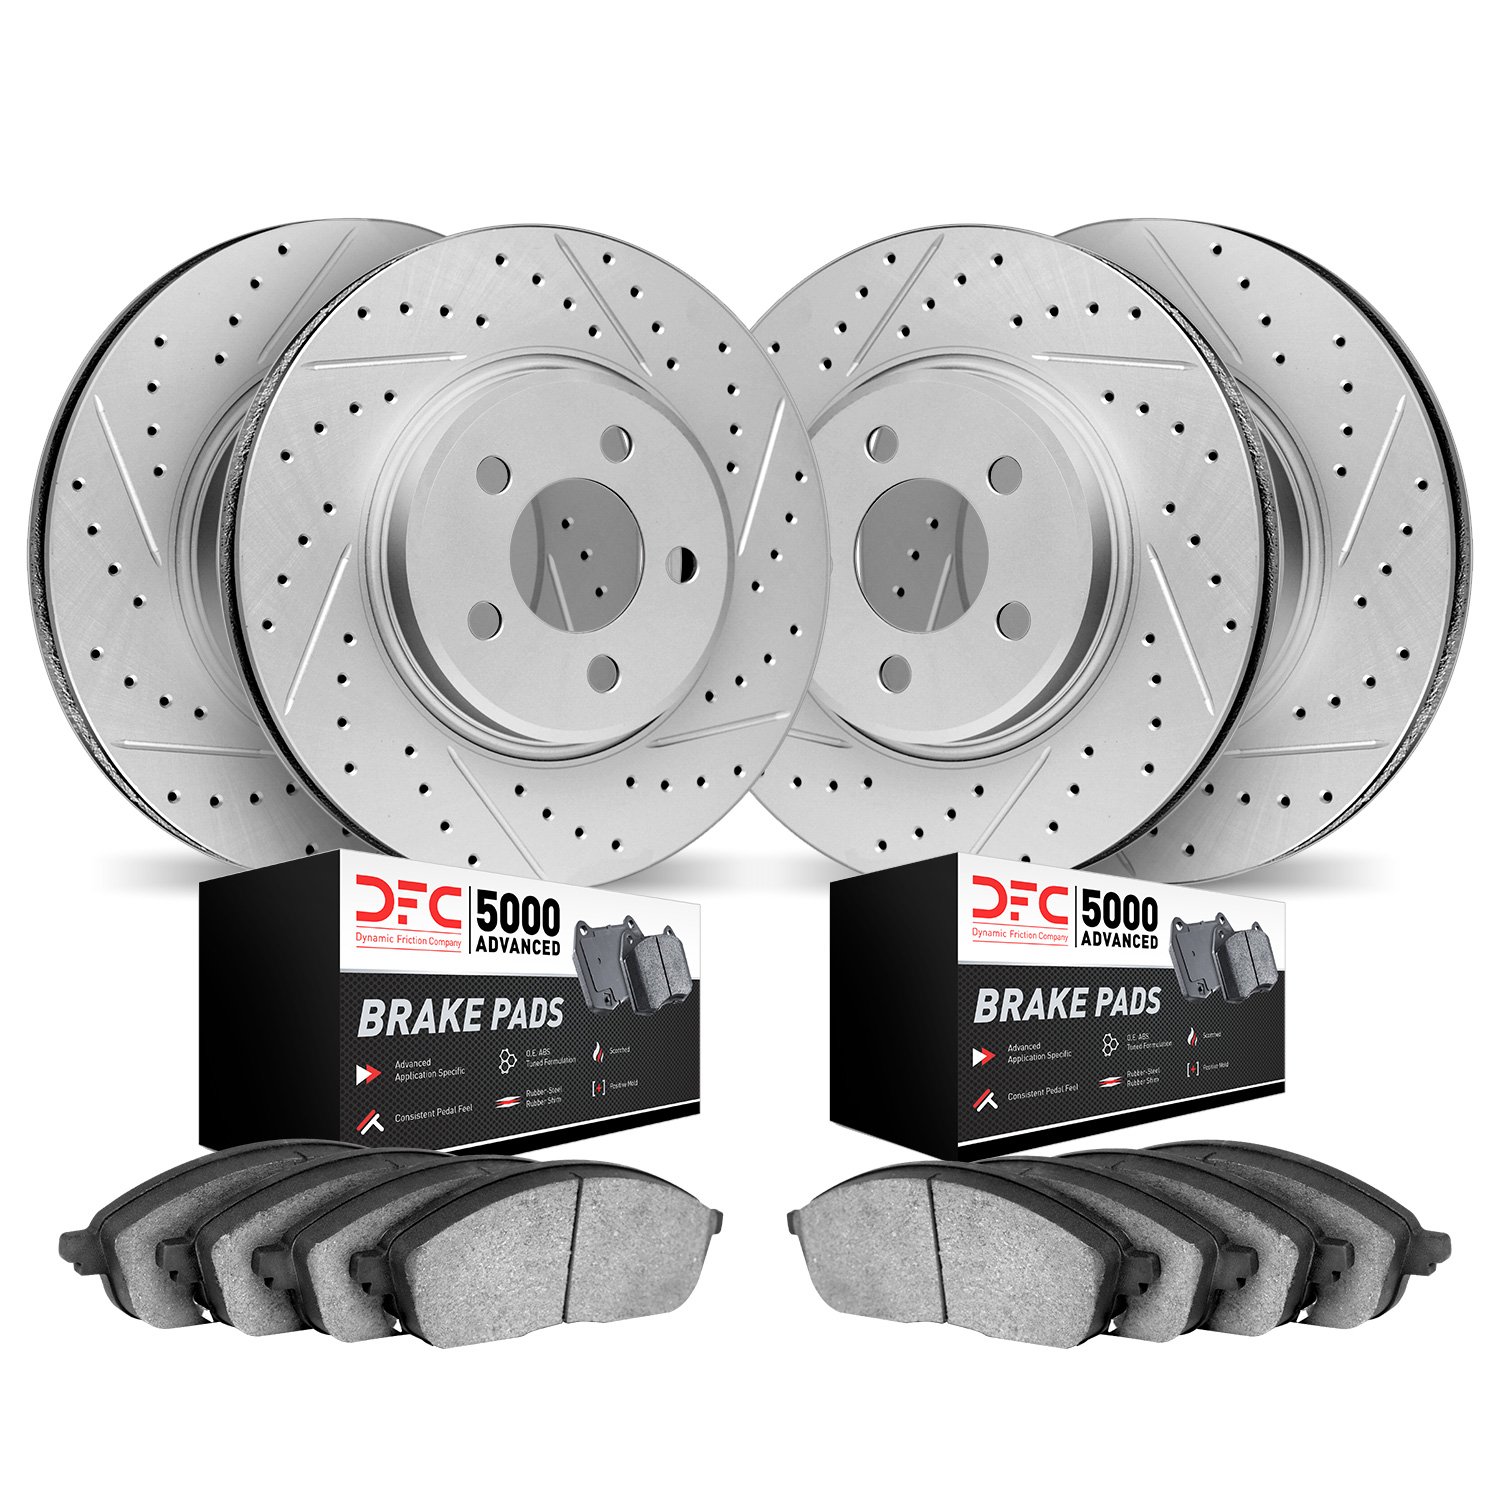 2504-31062 Geoperformance Drilled/Slotted Rotors w/5000 Advanced Brake Pads Kit, 2017-2019 Mini, Position: Front and Rear